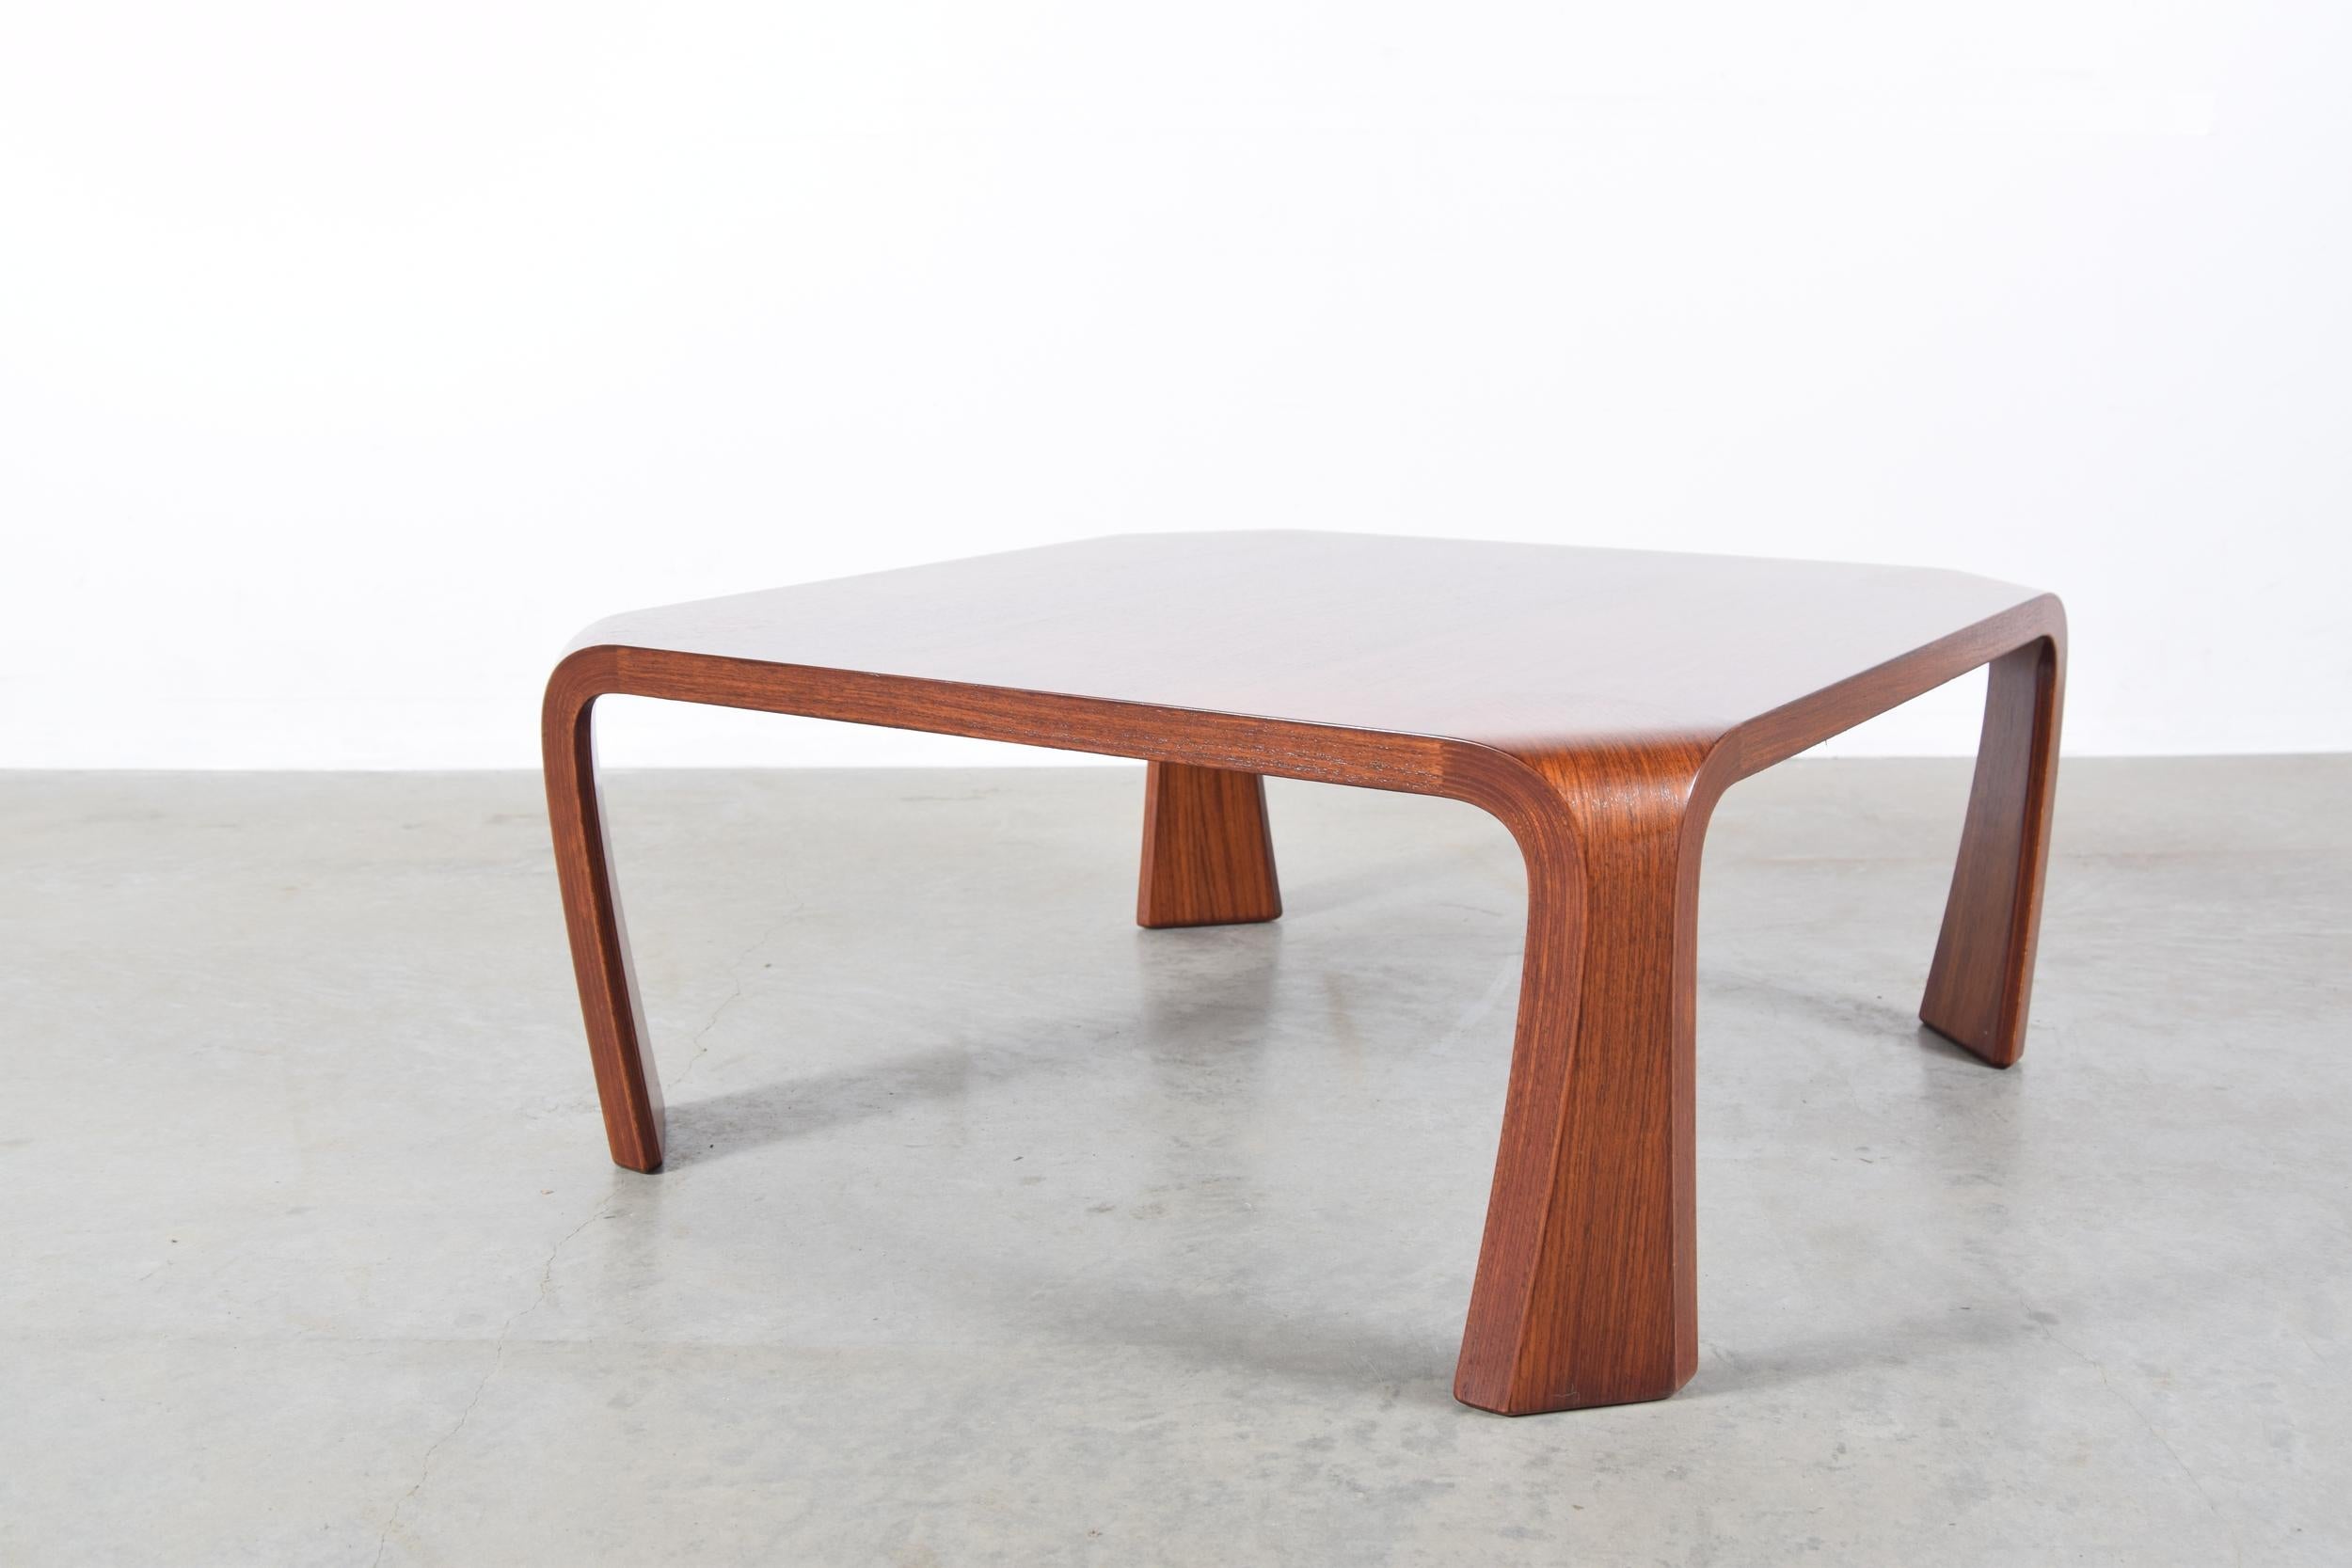 Coffee table designed by Saburo Inui for Tendo Mokko, Japan, circa 1960. Table is constructed of laminated rosewood and Japanese elm plywood. This design is based on the traditional Japanese Chabudai. Table measures 29 3/4